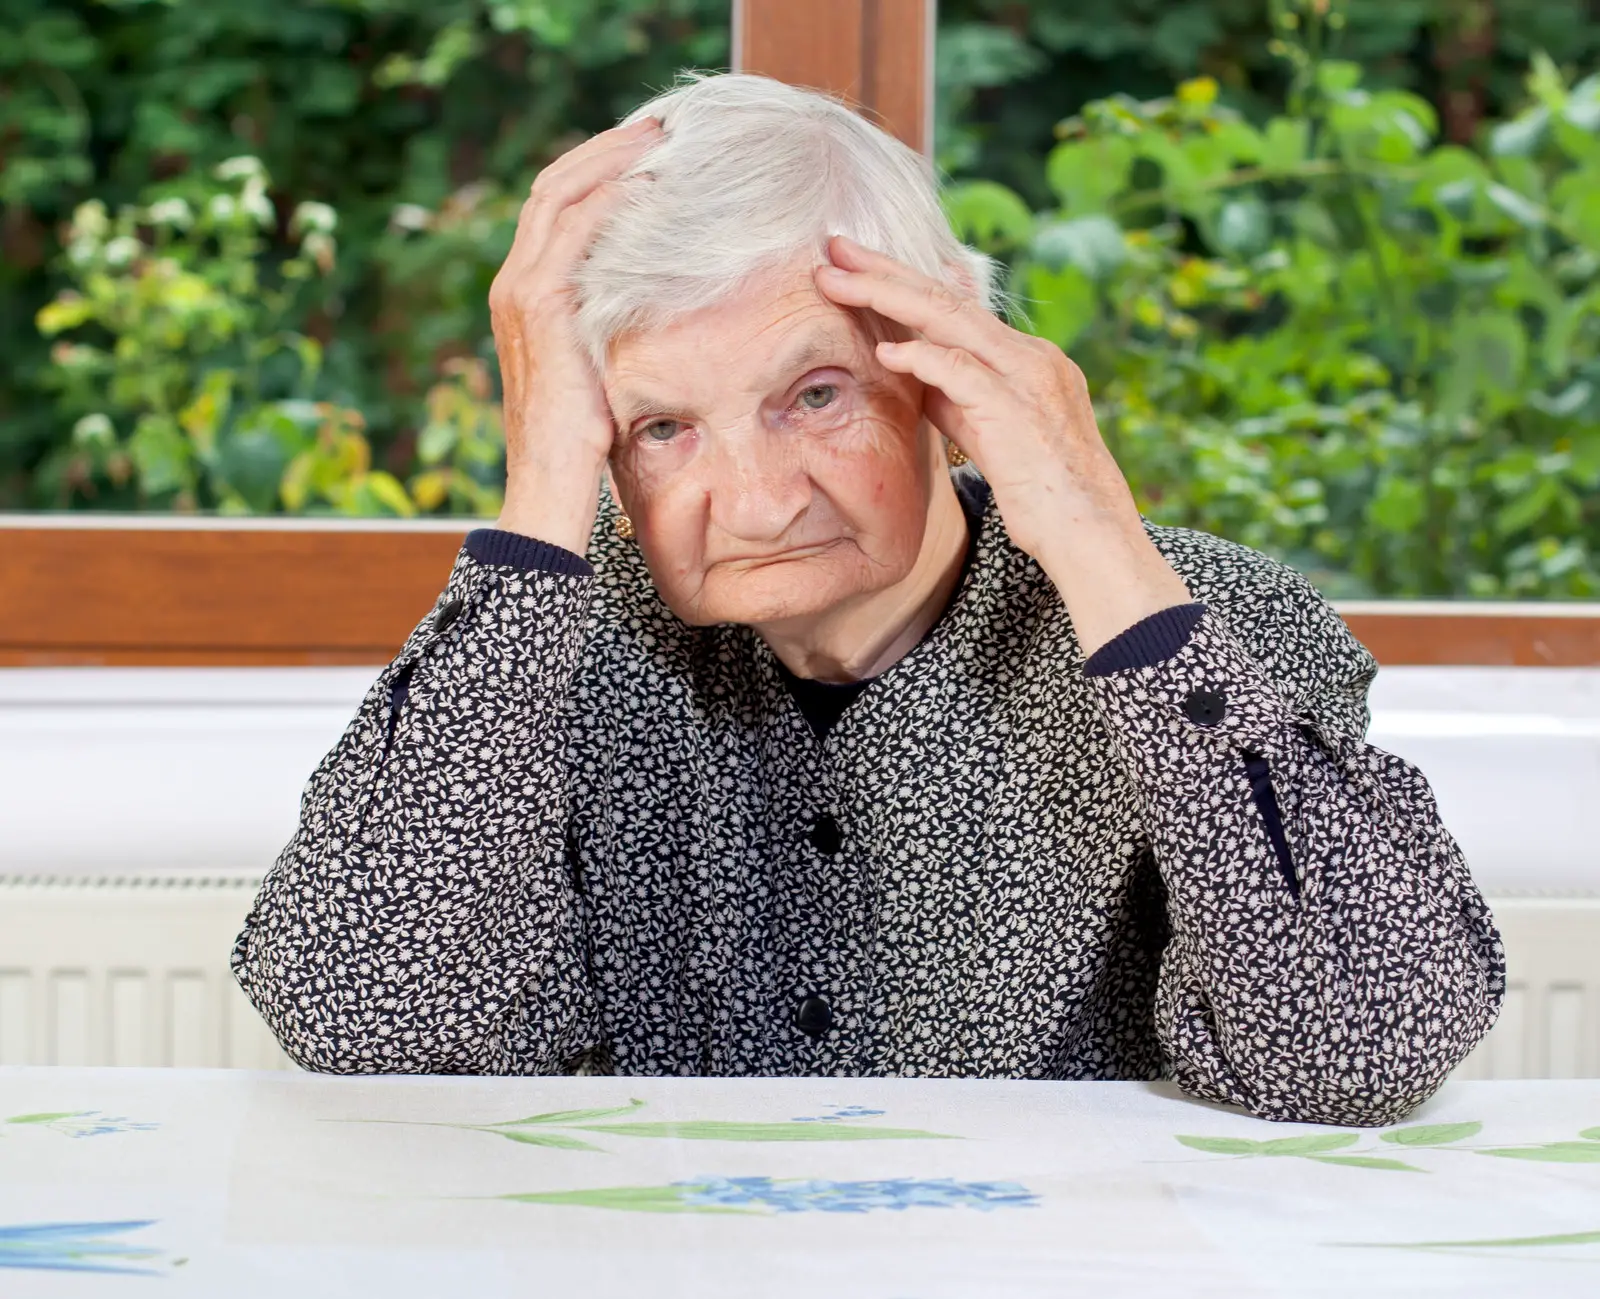 Unhappy senior woman sitting at the table looking confused